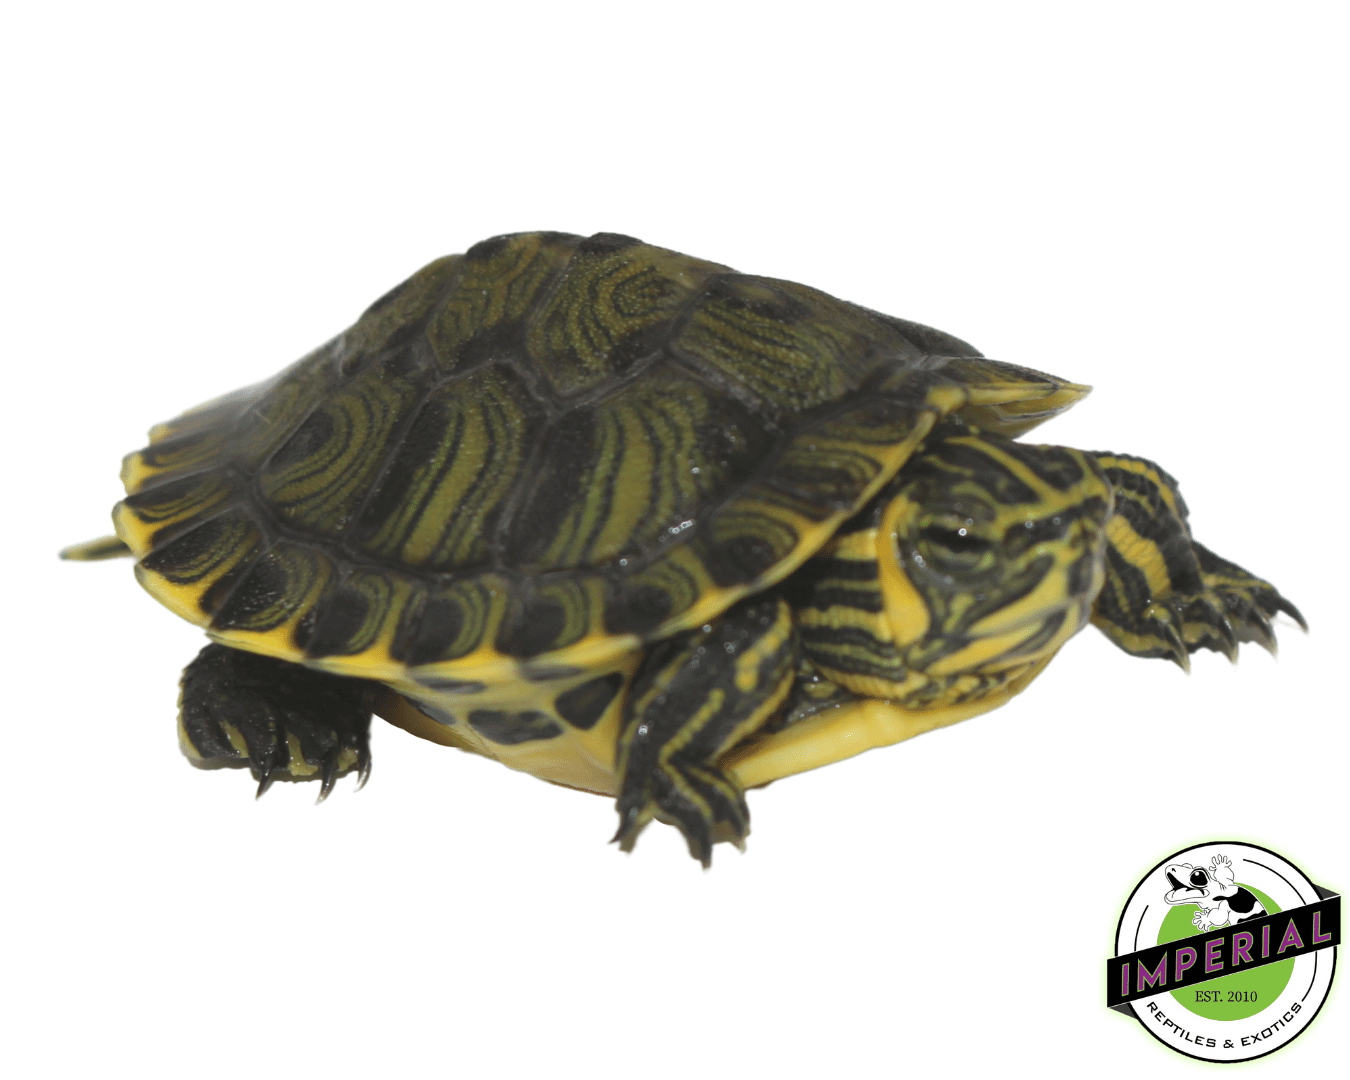 yellowbelly slider turtle for sale, buy reptiles online